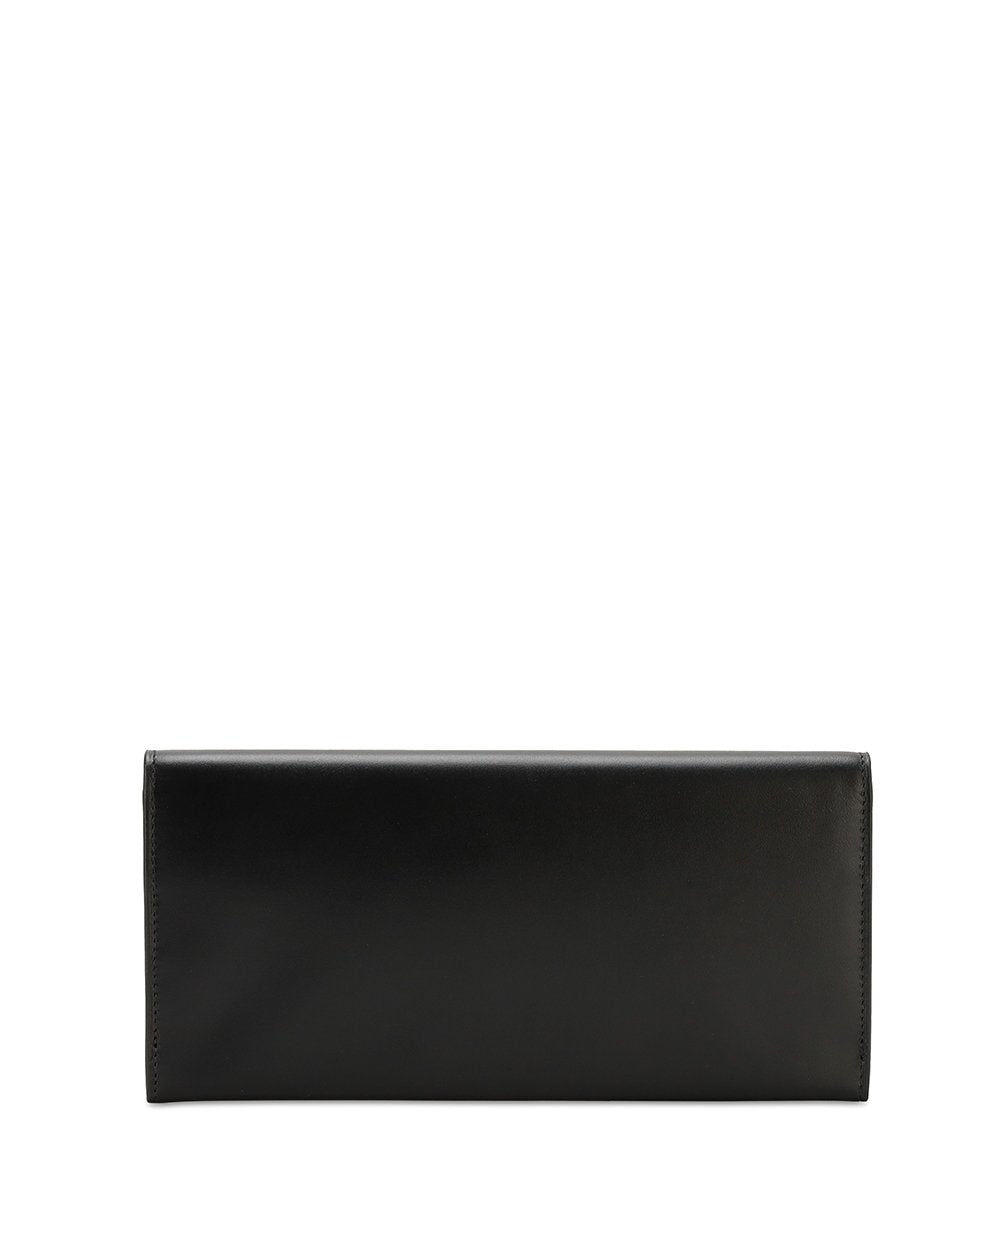 Leather Long Wallet - ISSI Outlet